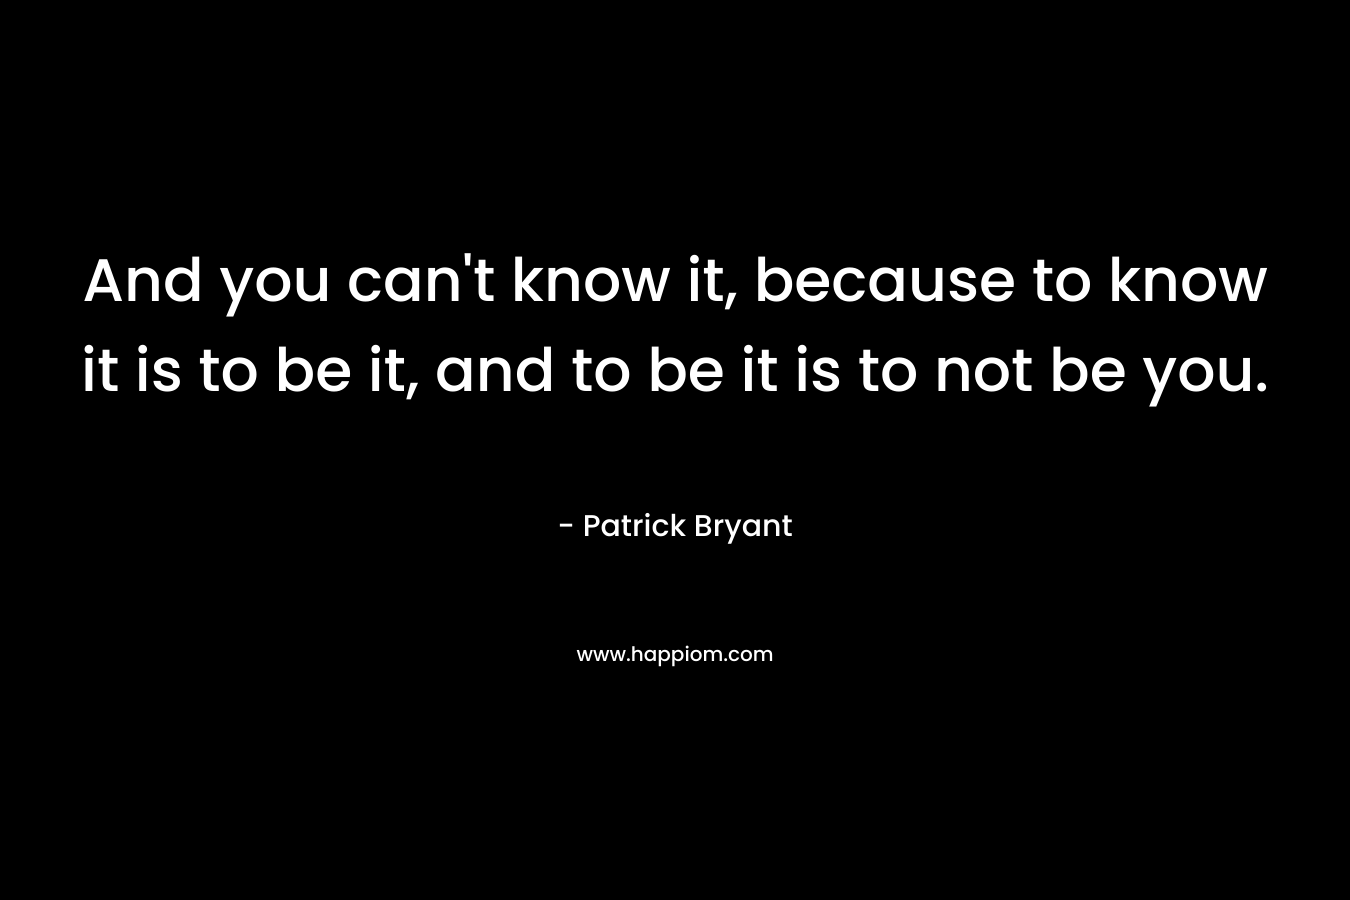 And you can’t know it, because to know it is to be it, and to be it is to not be you. – Patrick Bryant